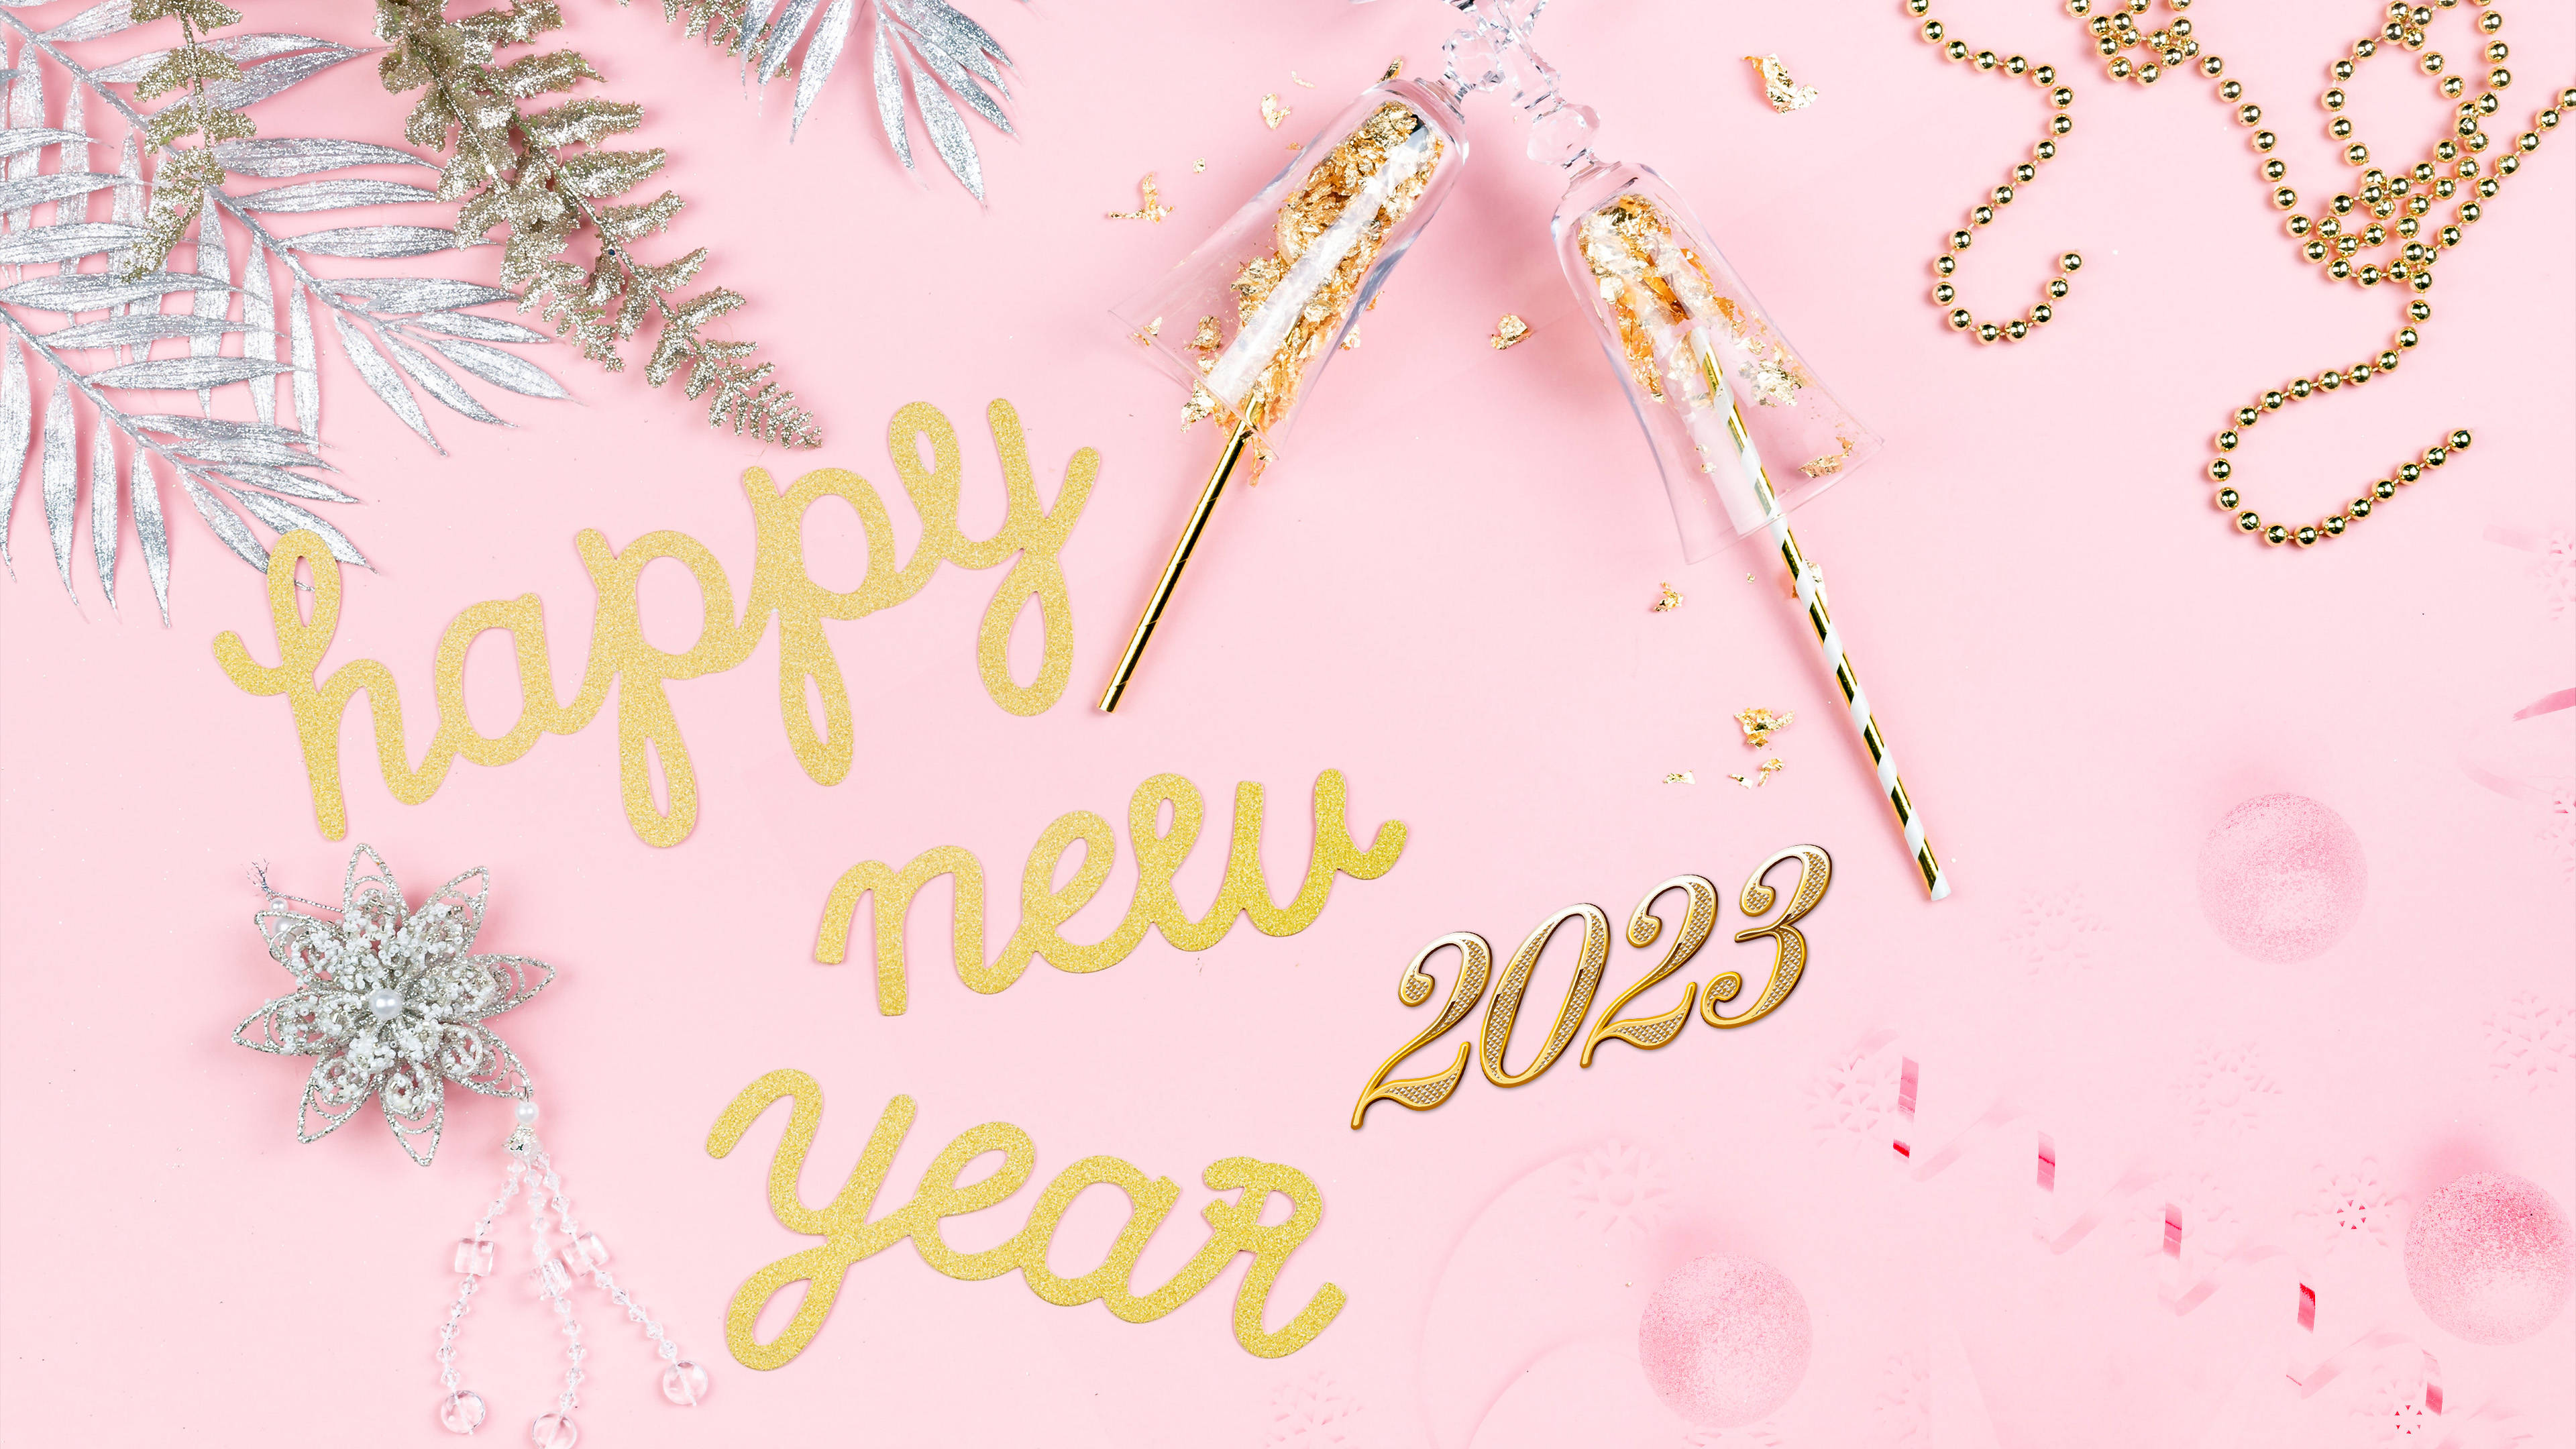 Download Glittery Gold Happy New Year 2023 Wallpaper